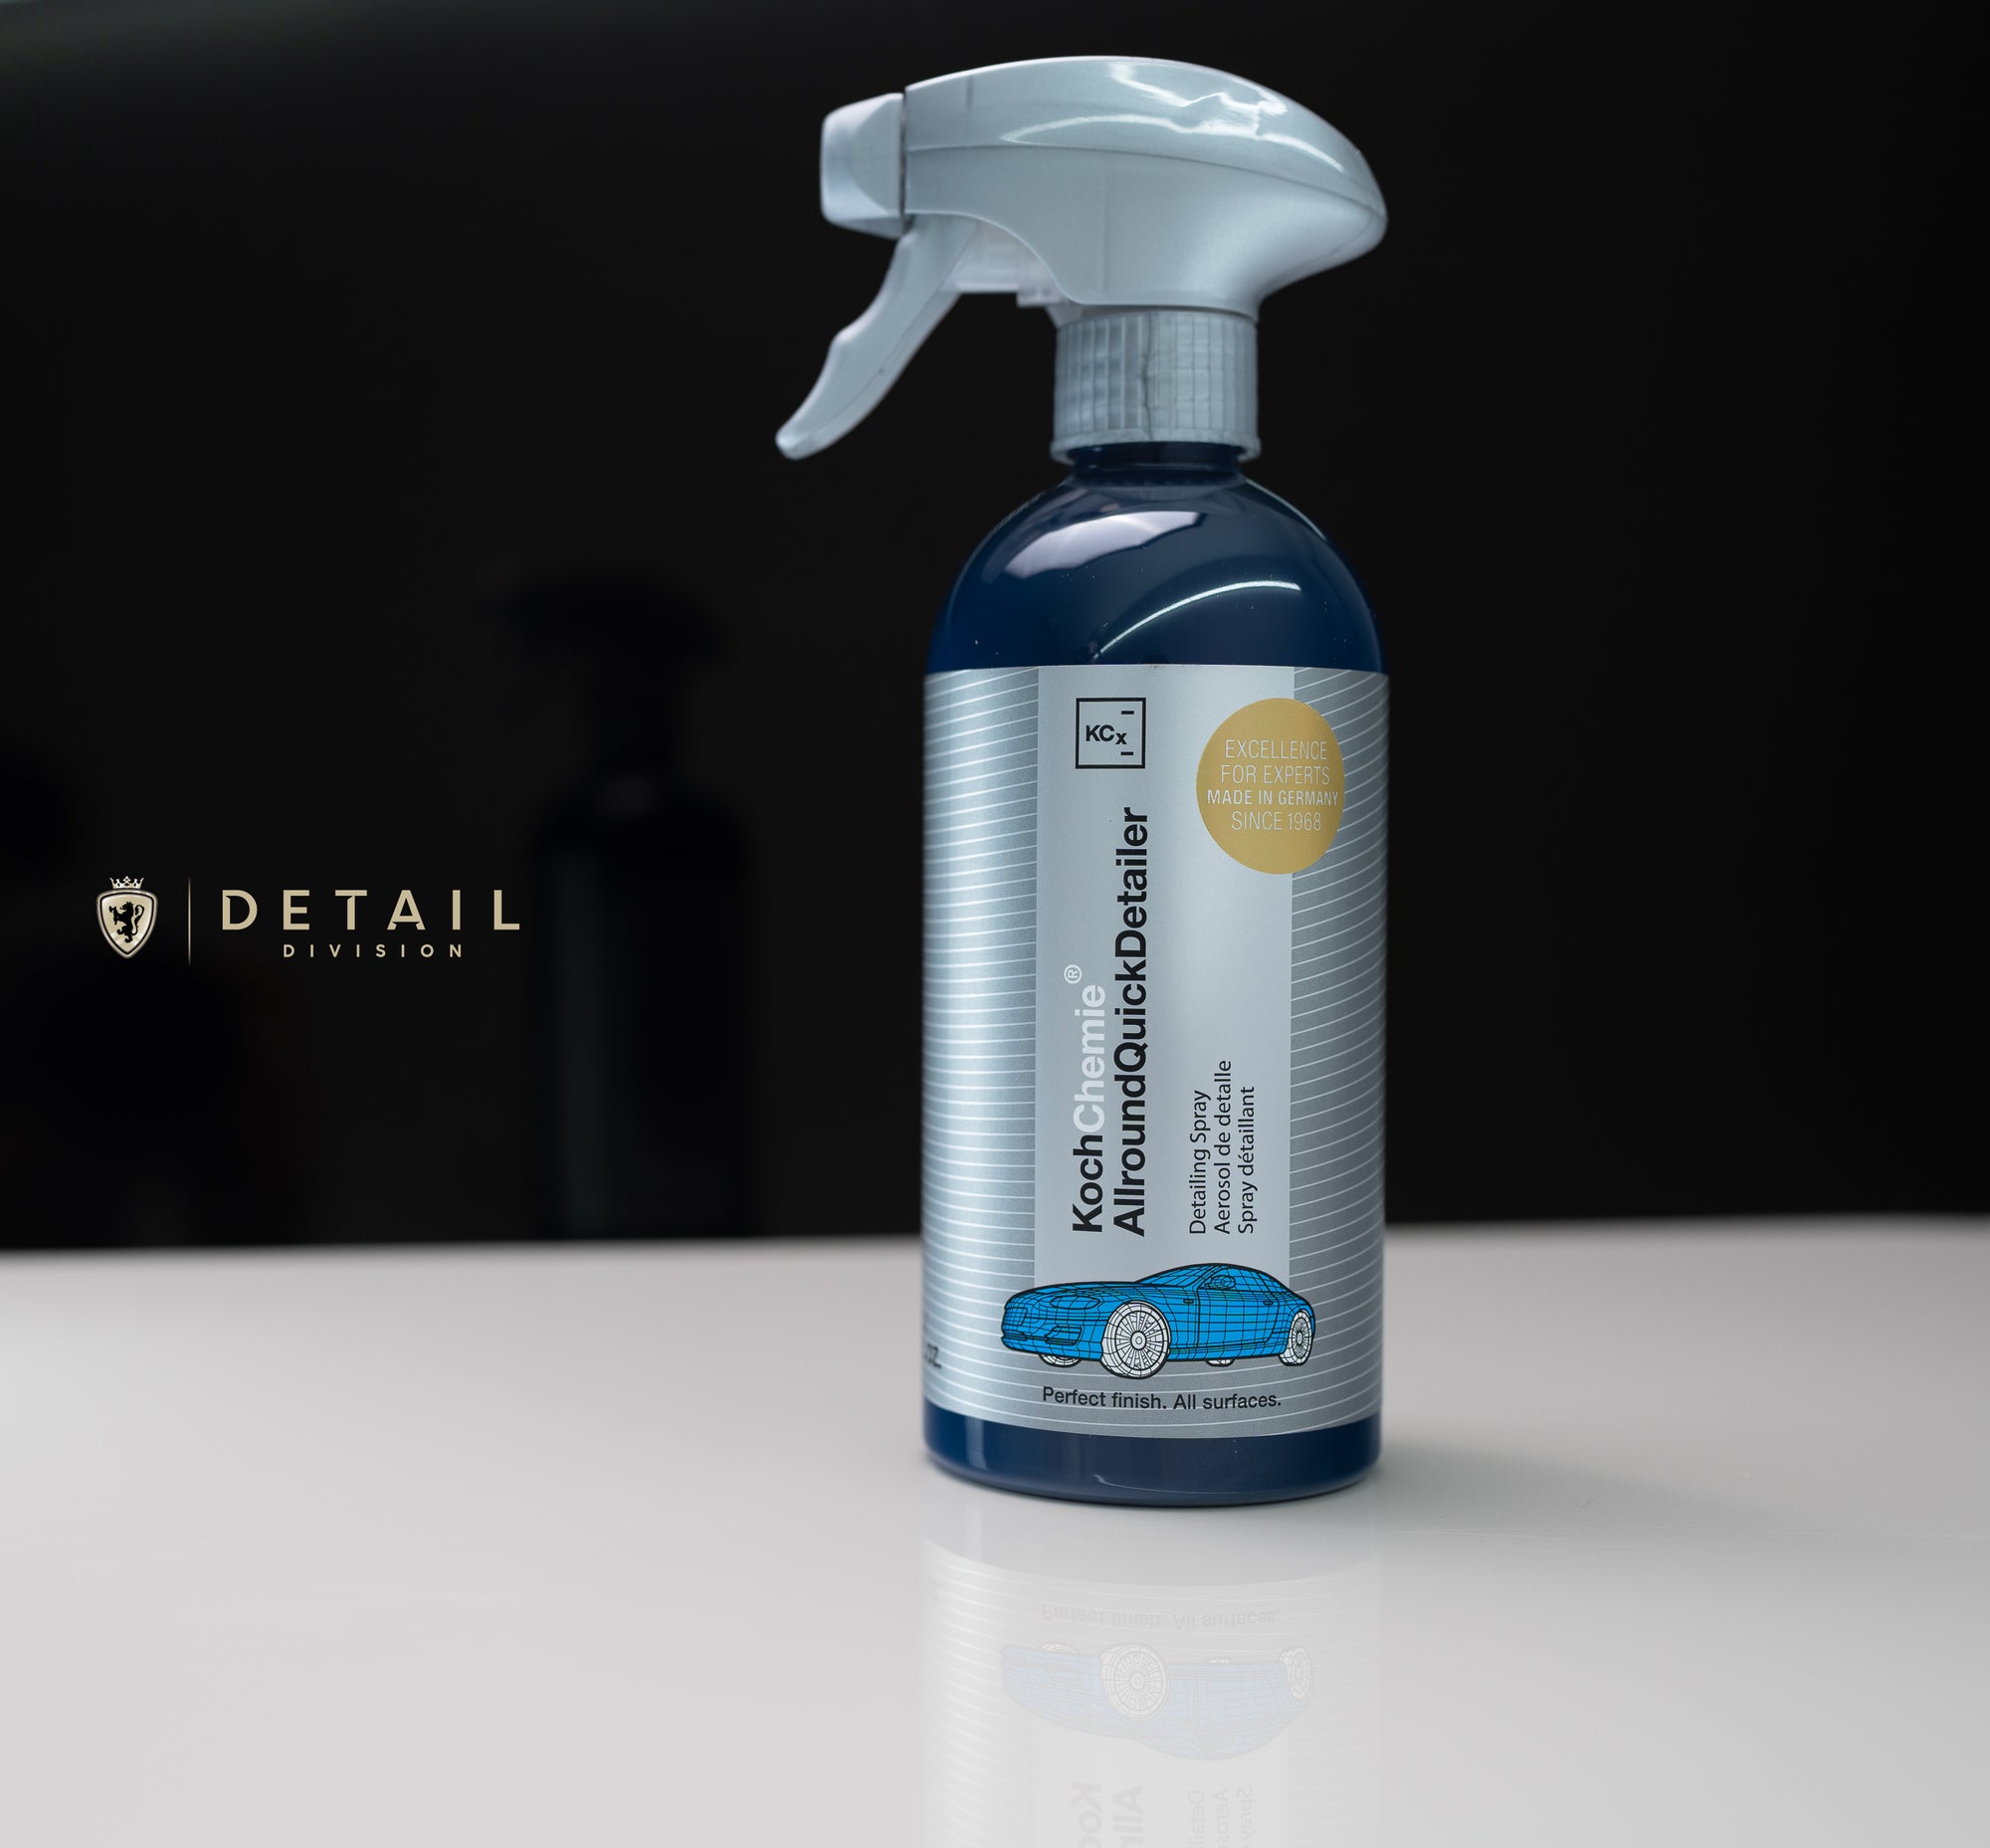 Quick Detailer QD. Professional Detailing Products, Because Your